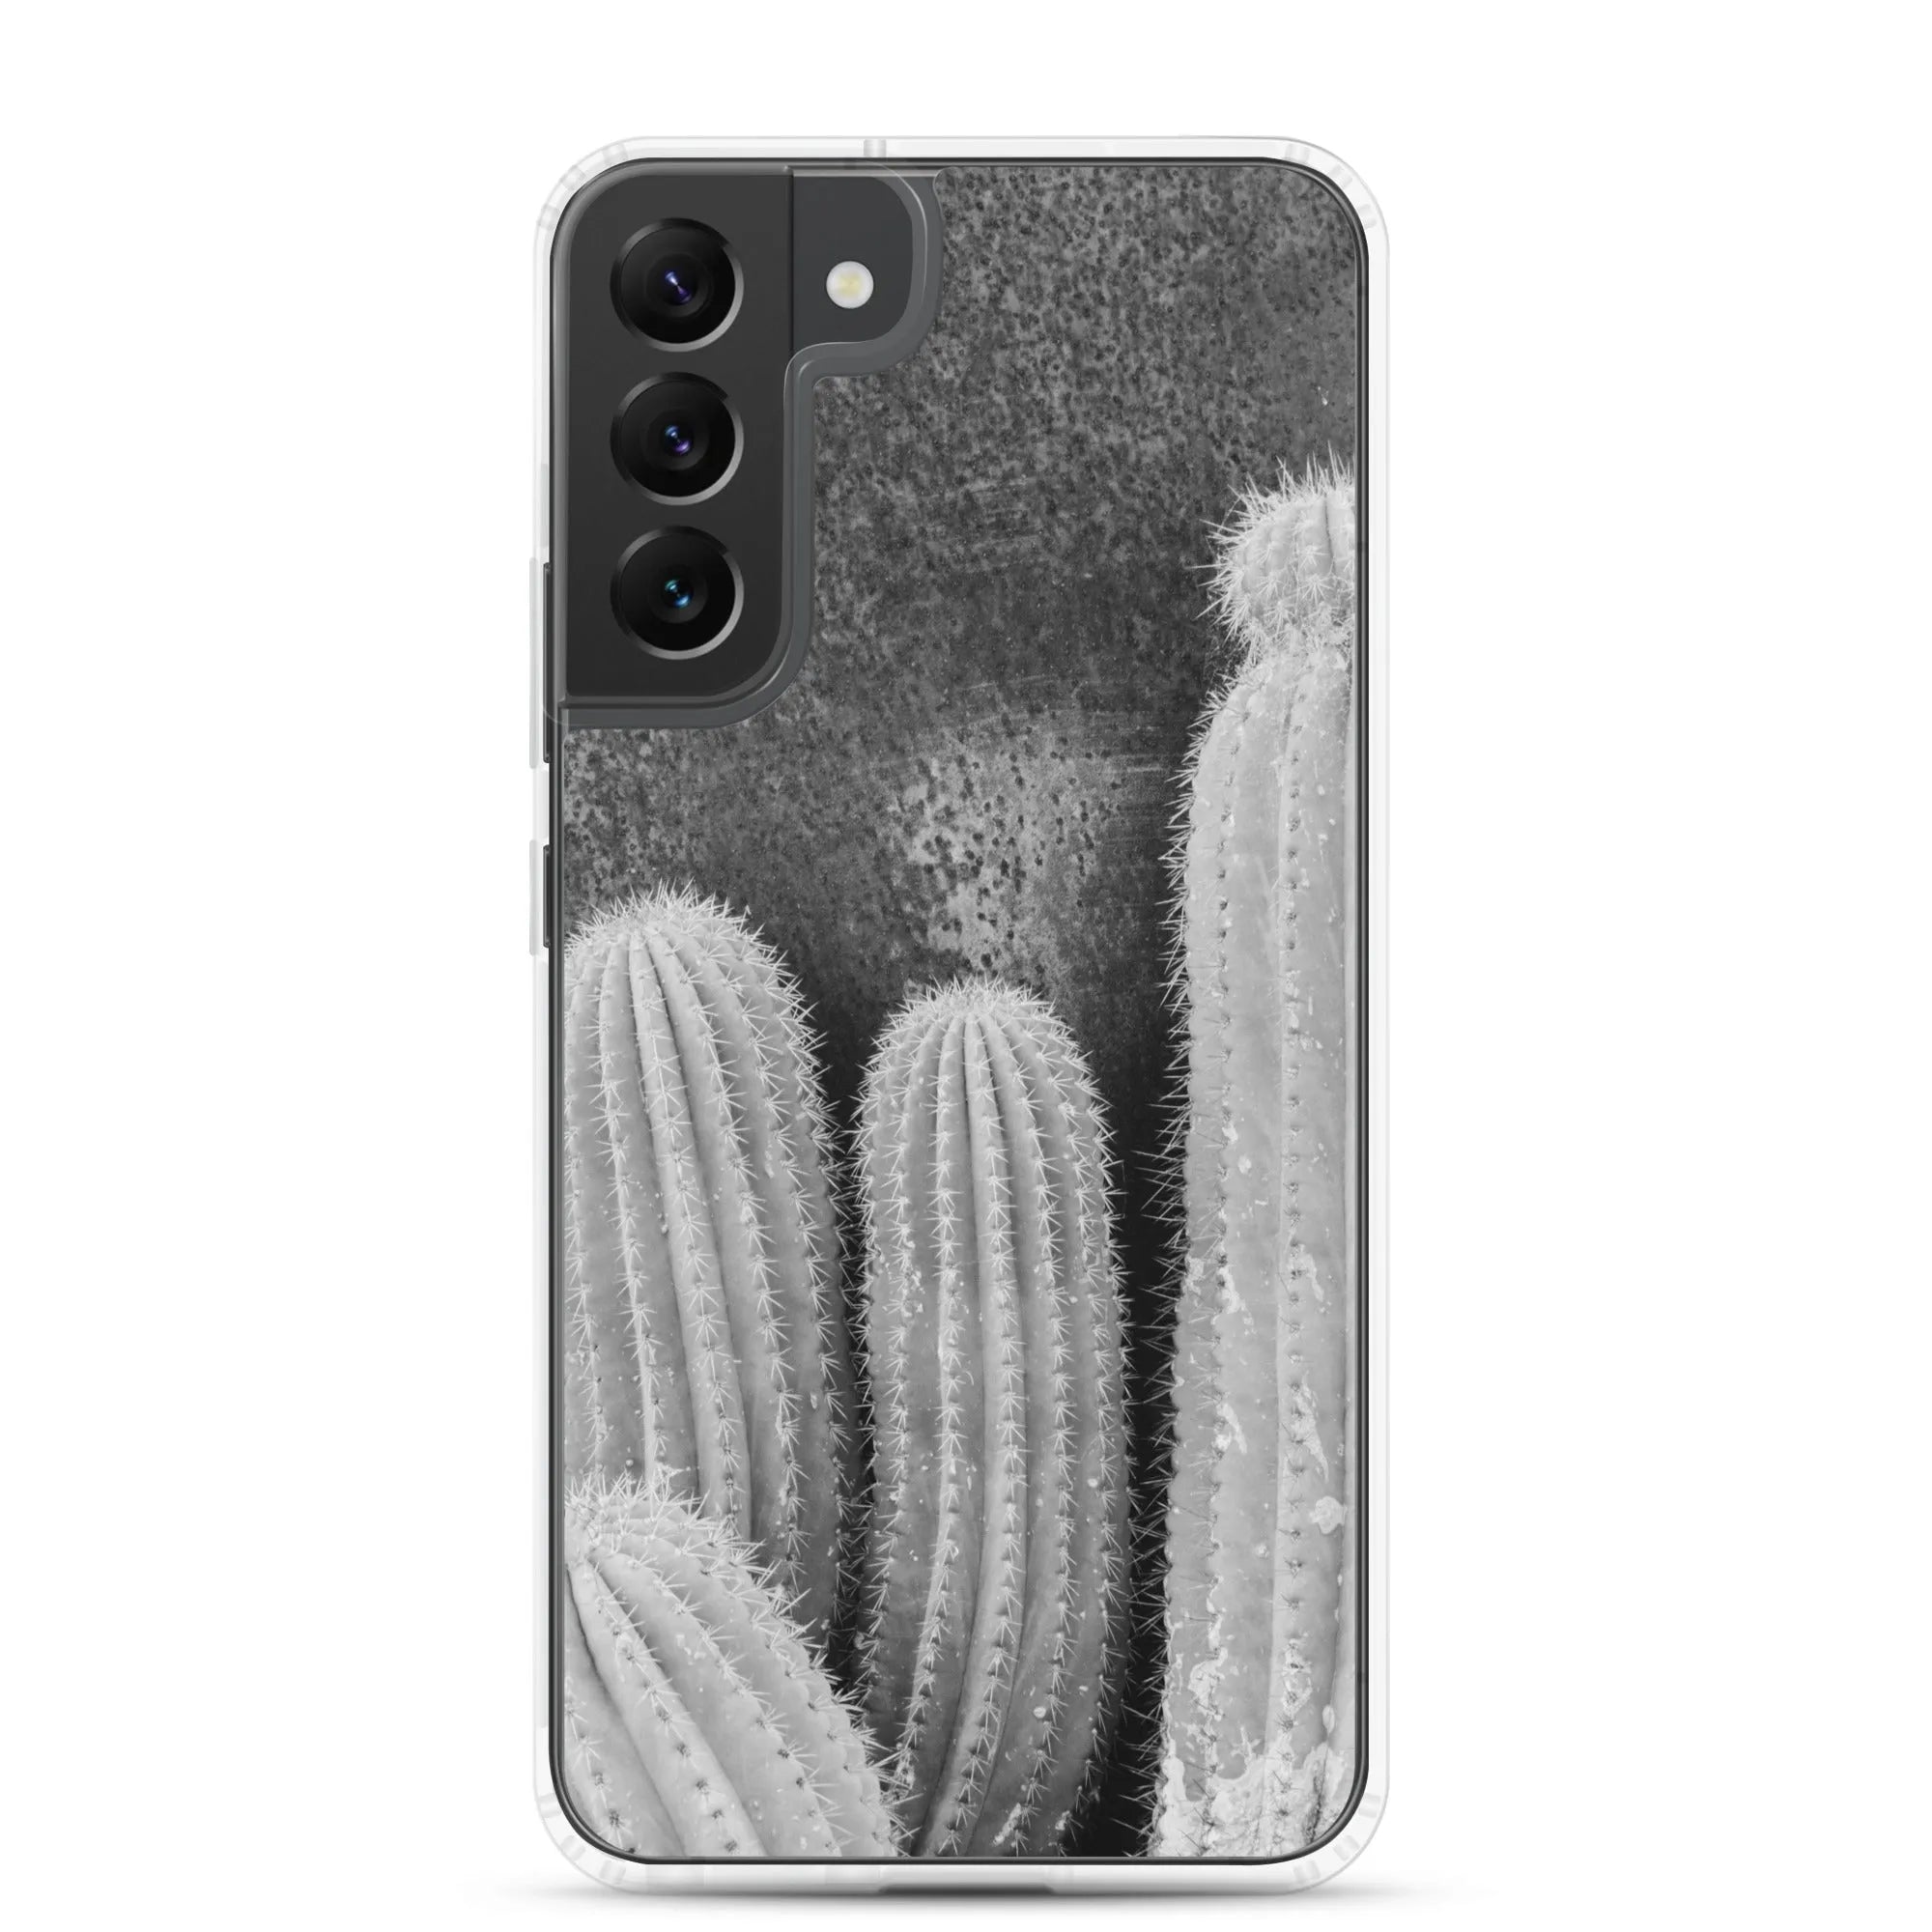 Family Affair Samsung Galaxy Case - Black And White - Samsung Galaxy S22 Plus - Mobile Phone Cases - Aesthetic Art